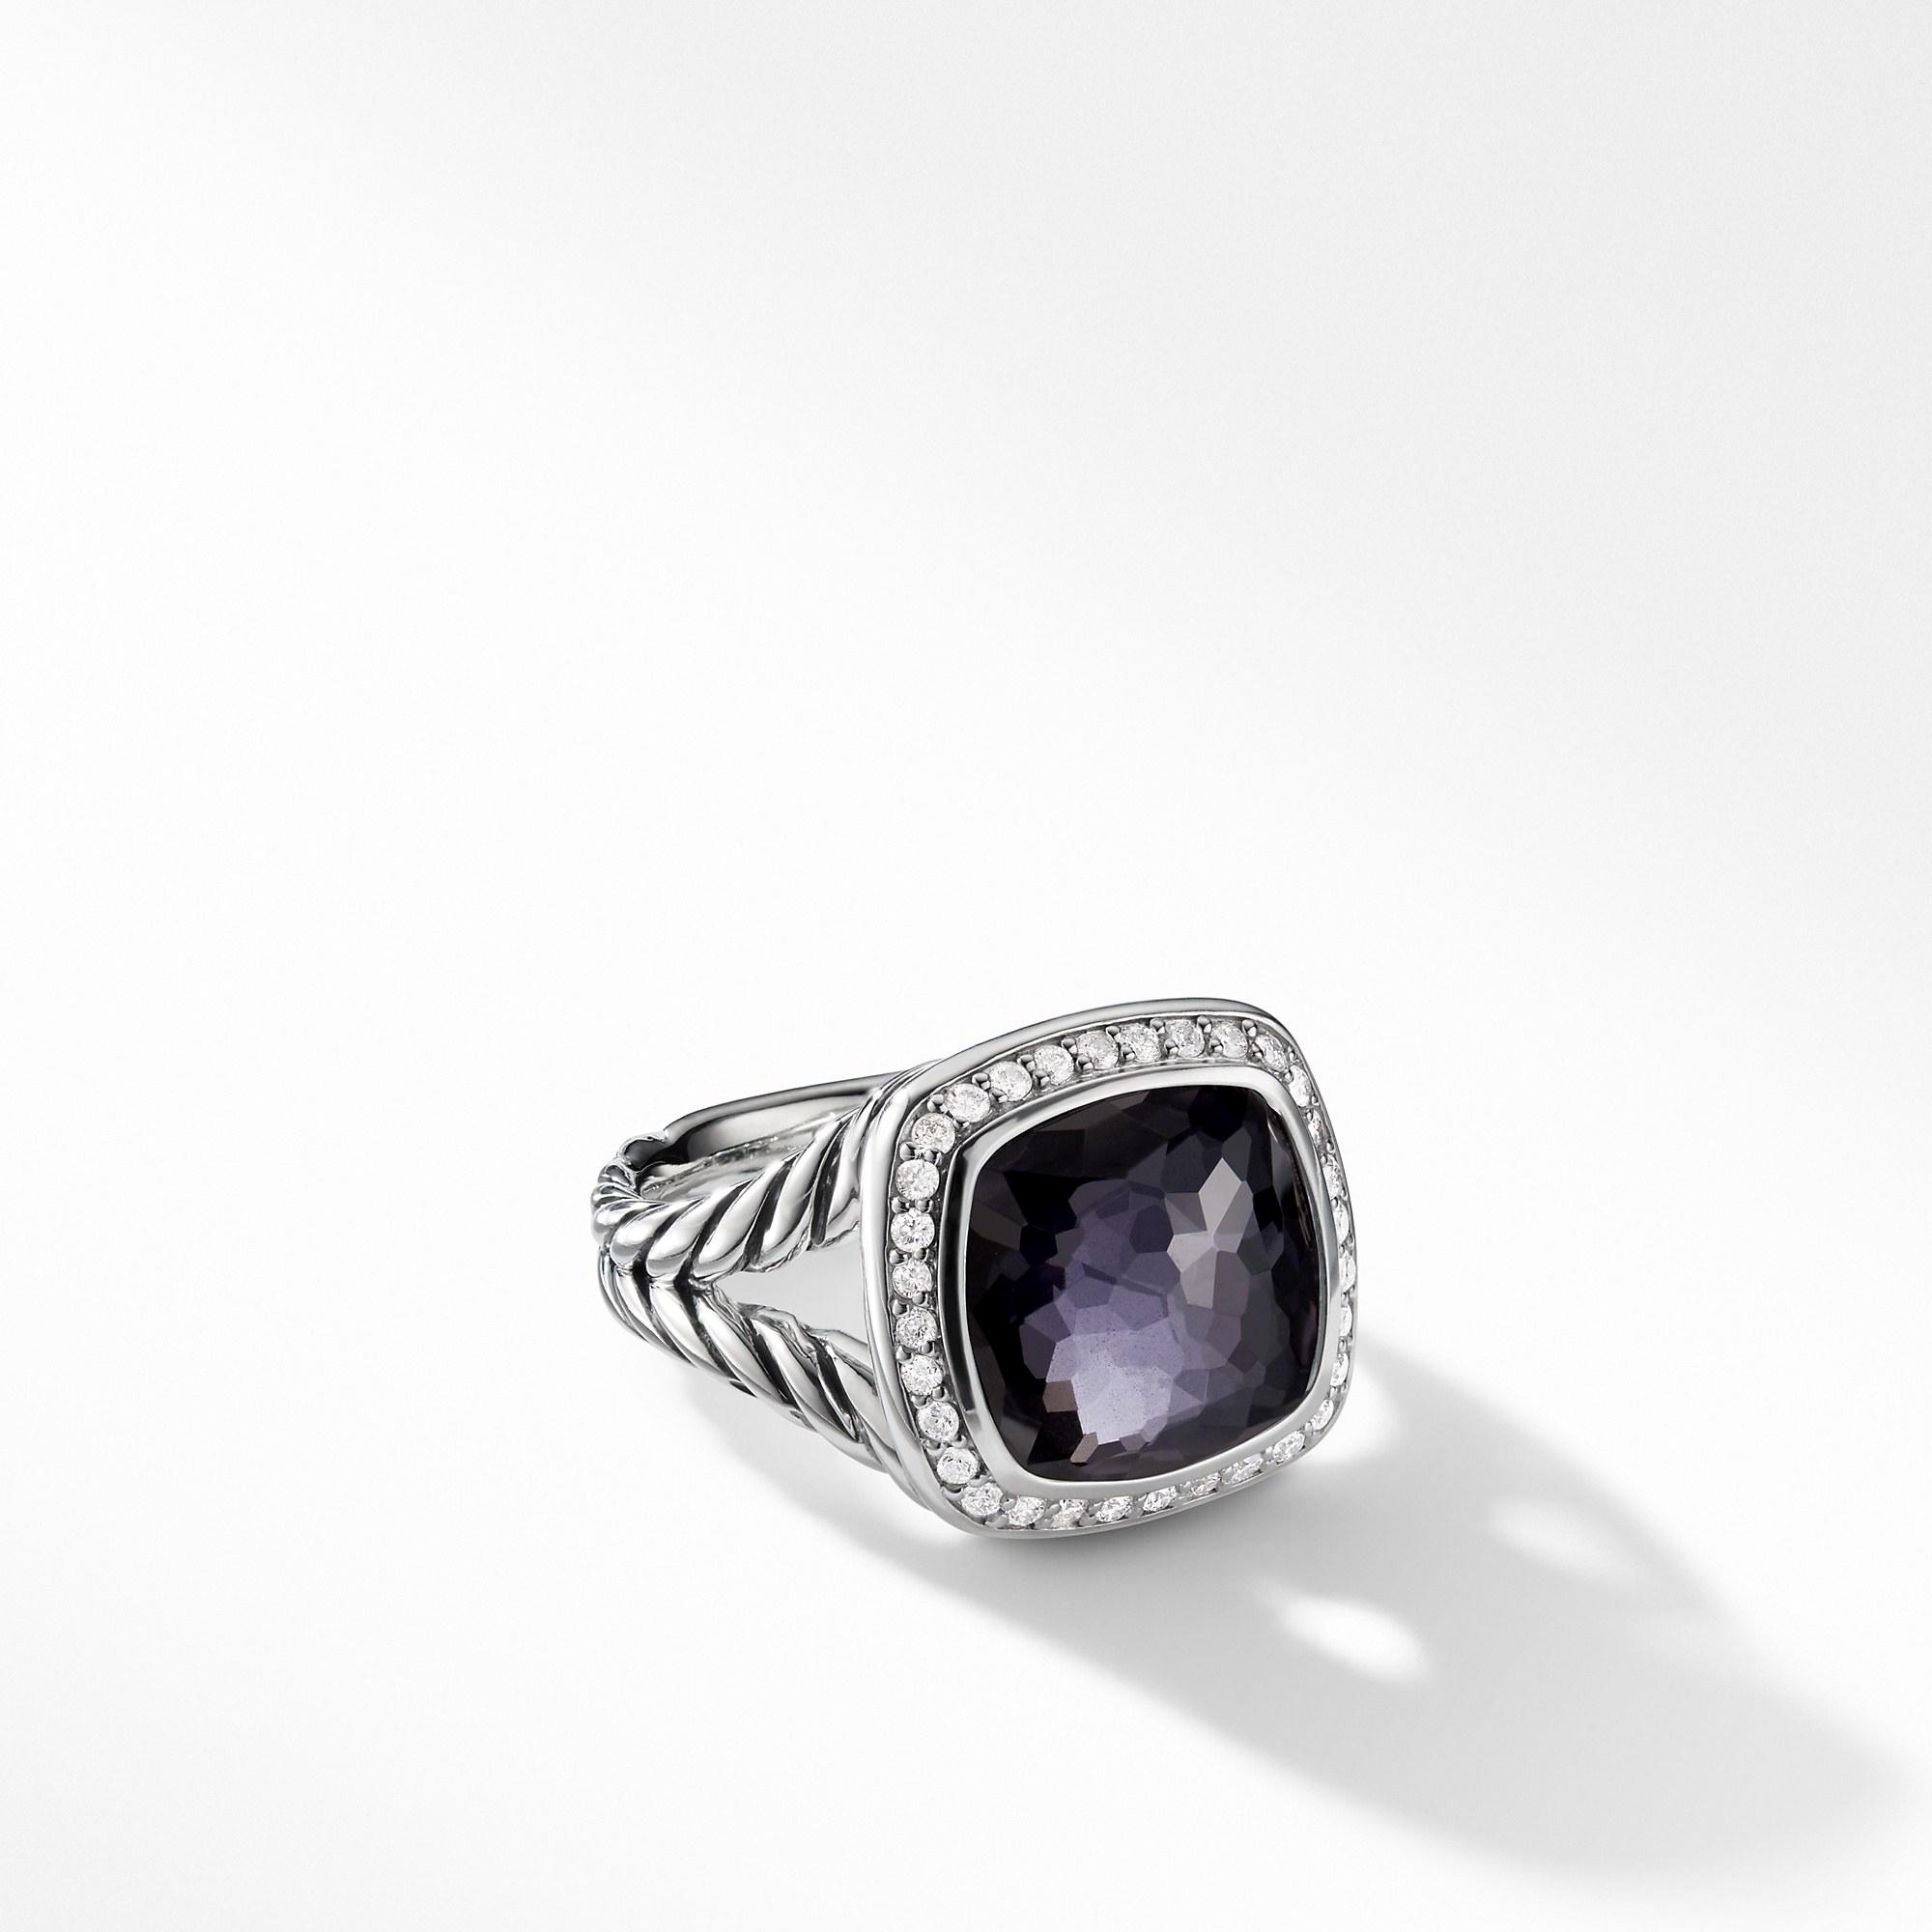 David Yurman Albion Ring with Lavender Amethyst and Diamonds, size 6 0